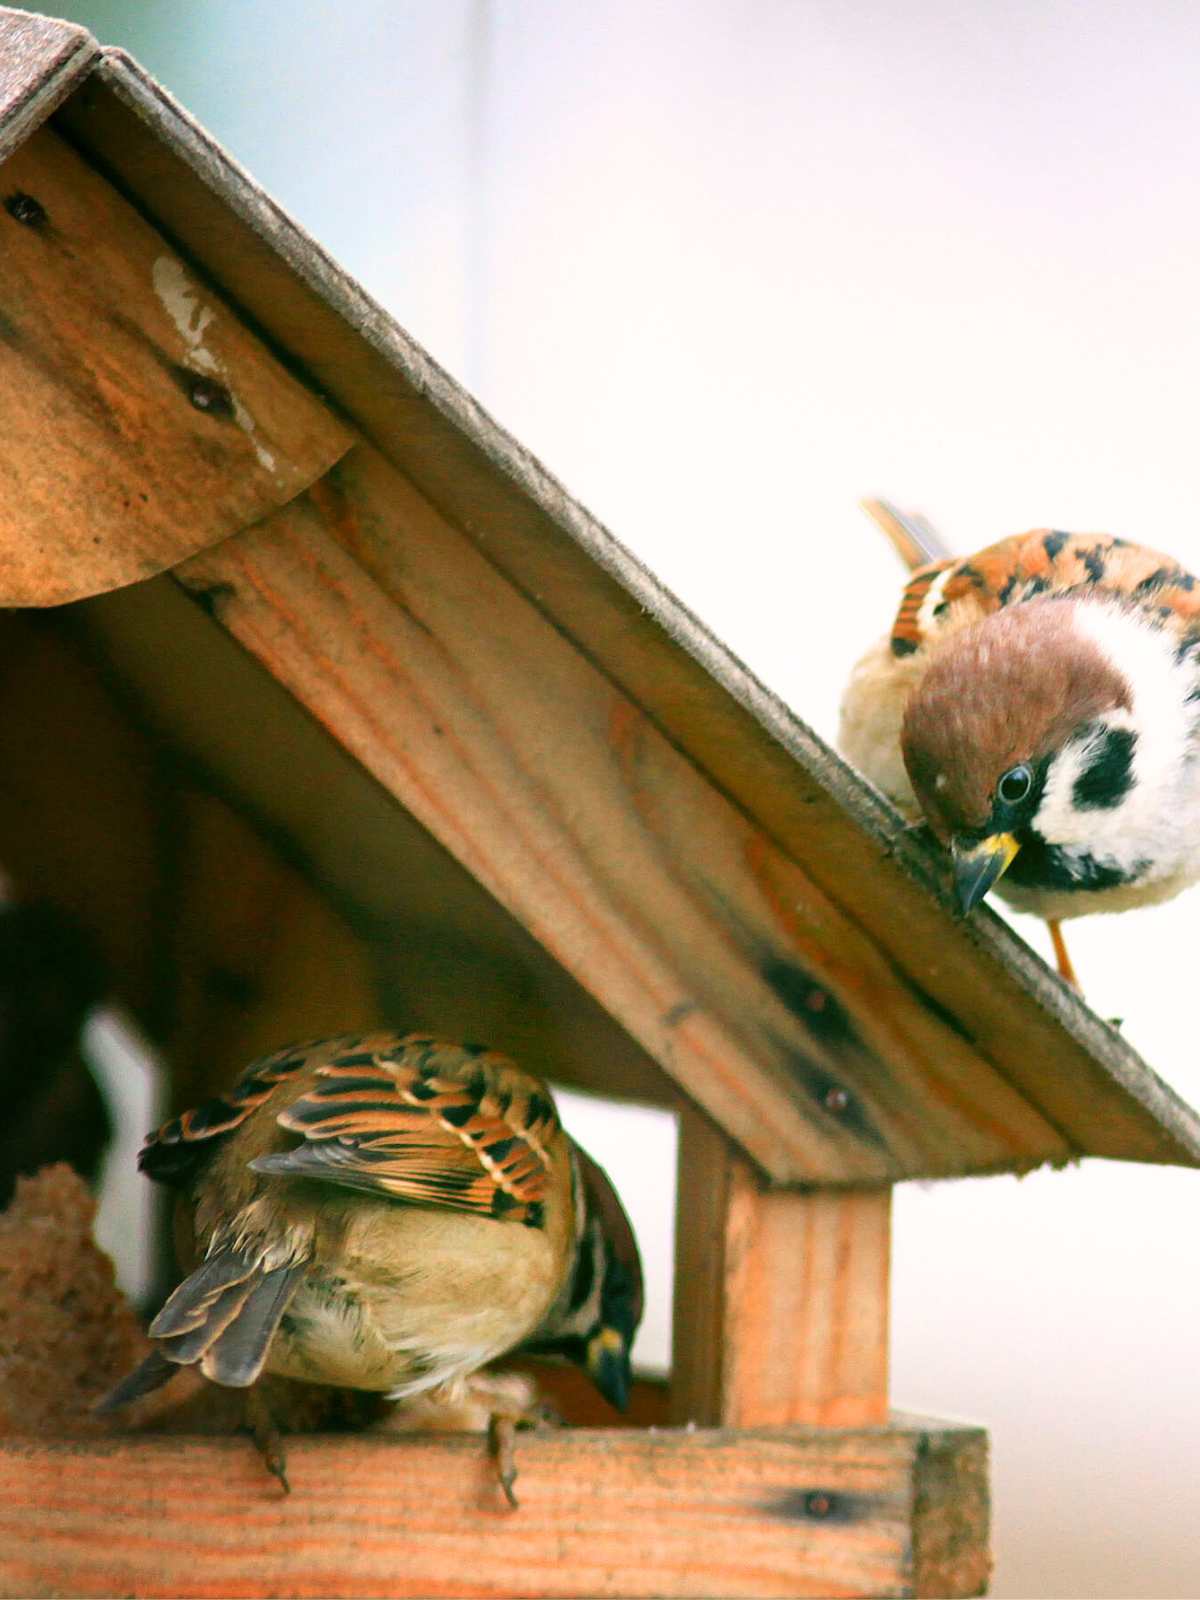 Two sparrows at a wooden bird feeder. one on the roof looking down and the other on the bottom of the feeder looking inside.